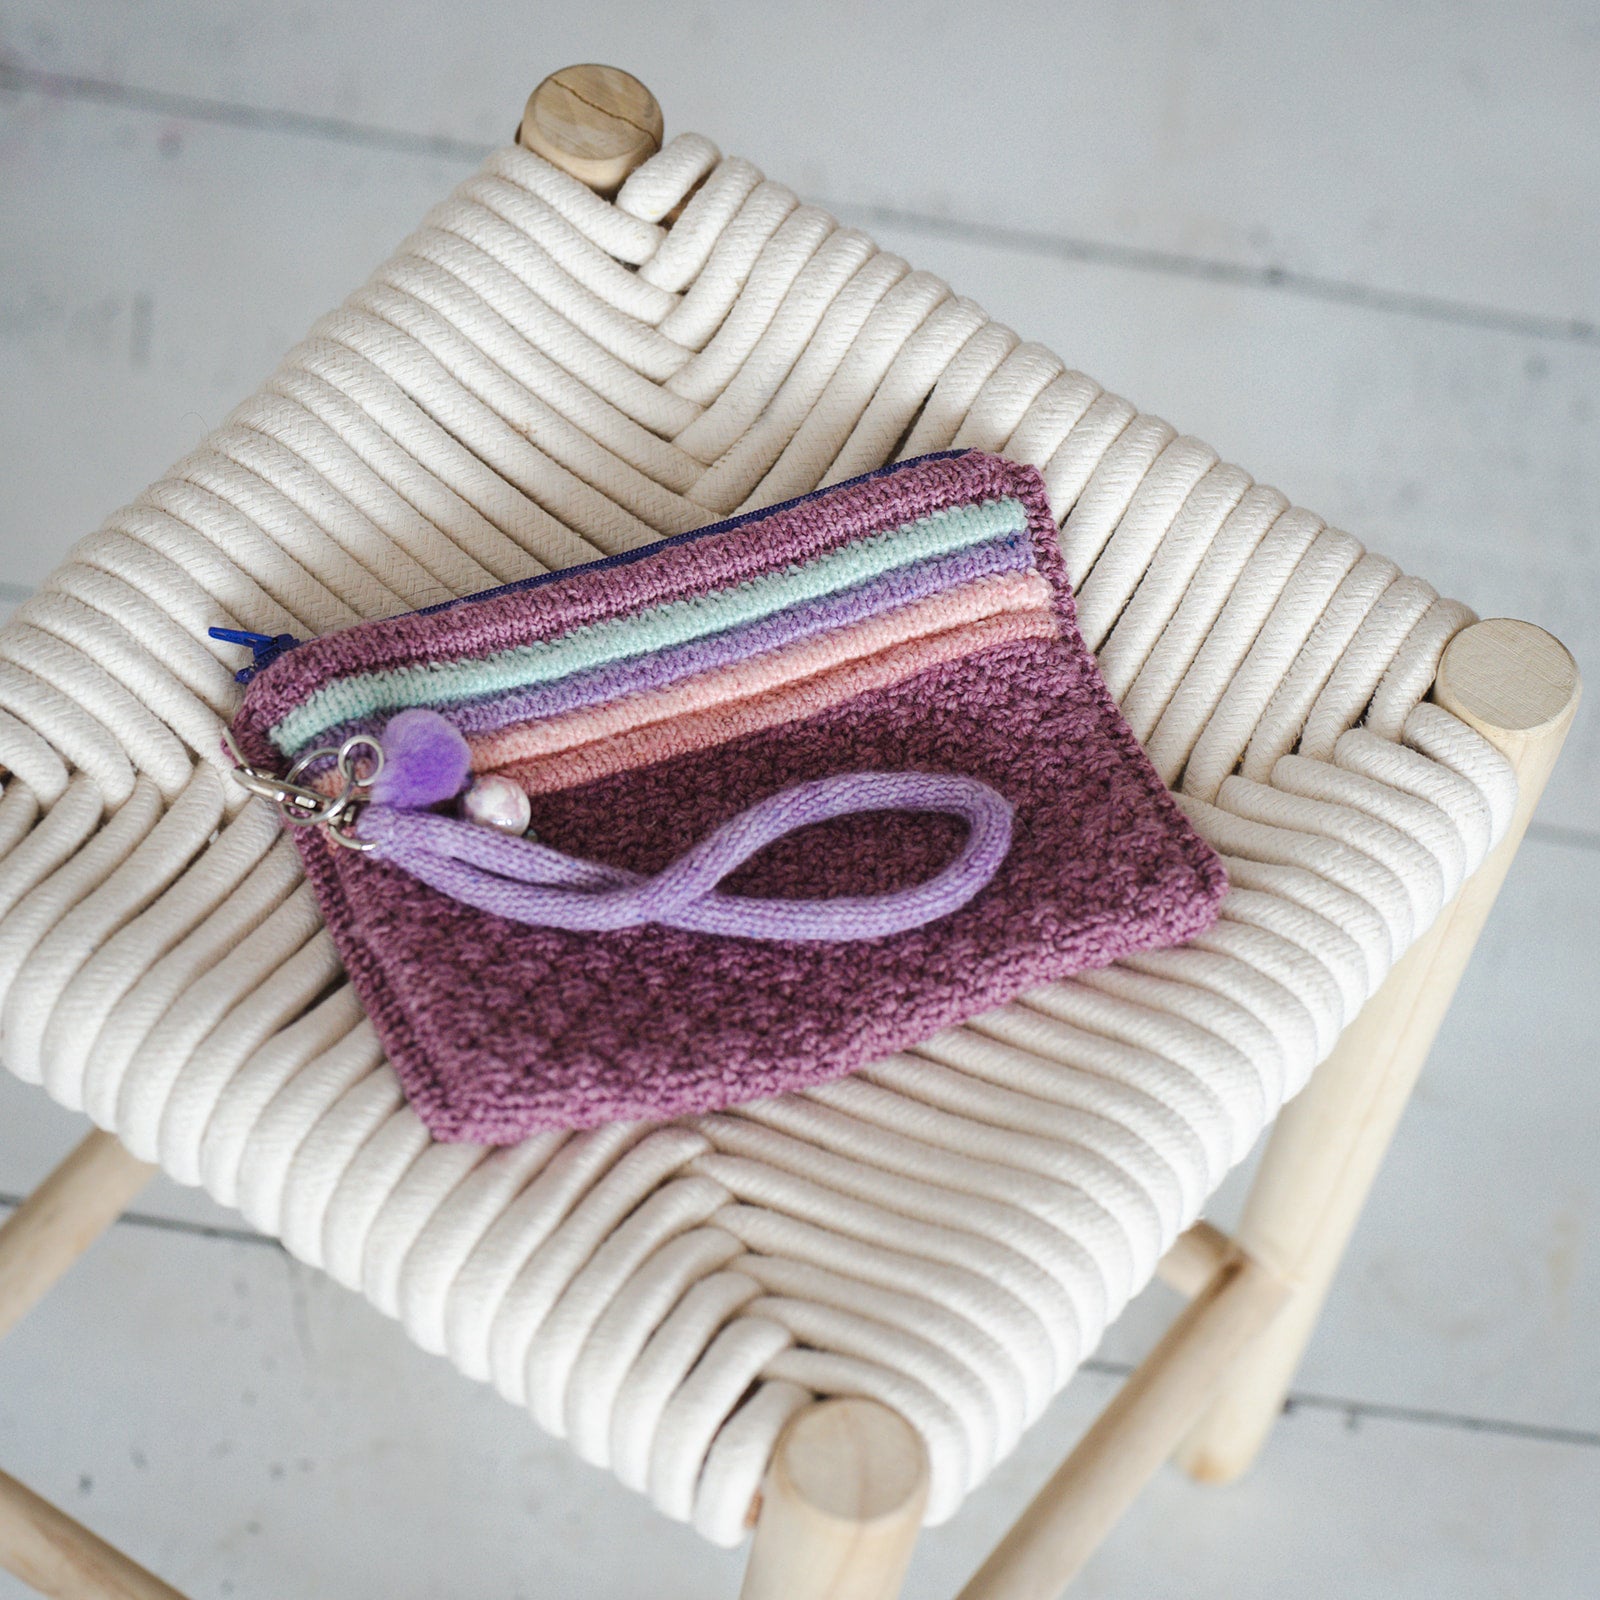 A zippered notions pouch has been hand knit from pink, green, orange, and purple fabric. It has a handle attached with a lobster claw clasp.